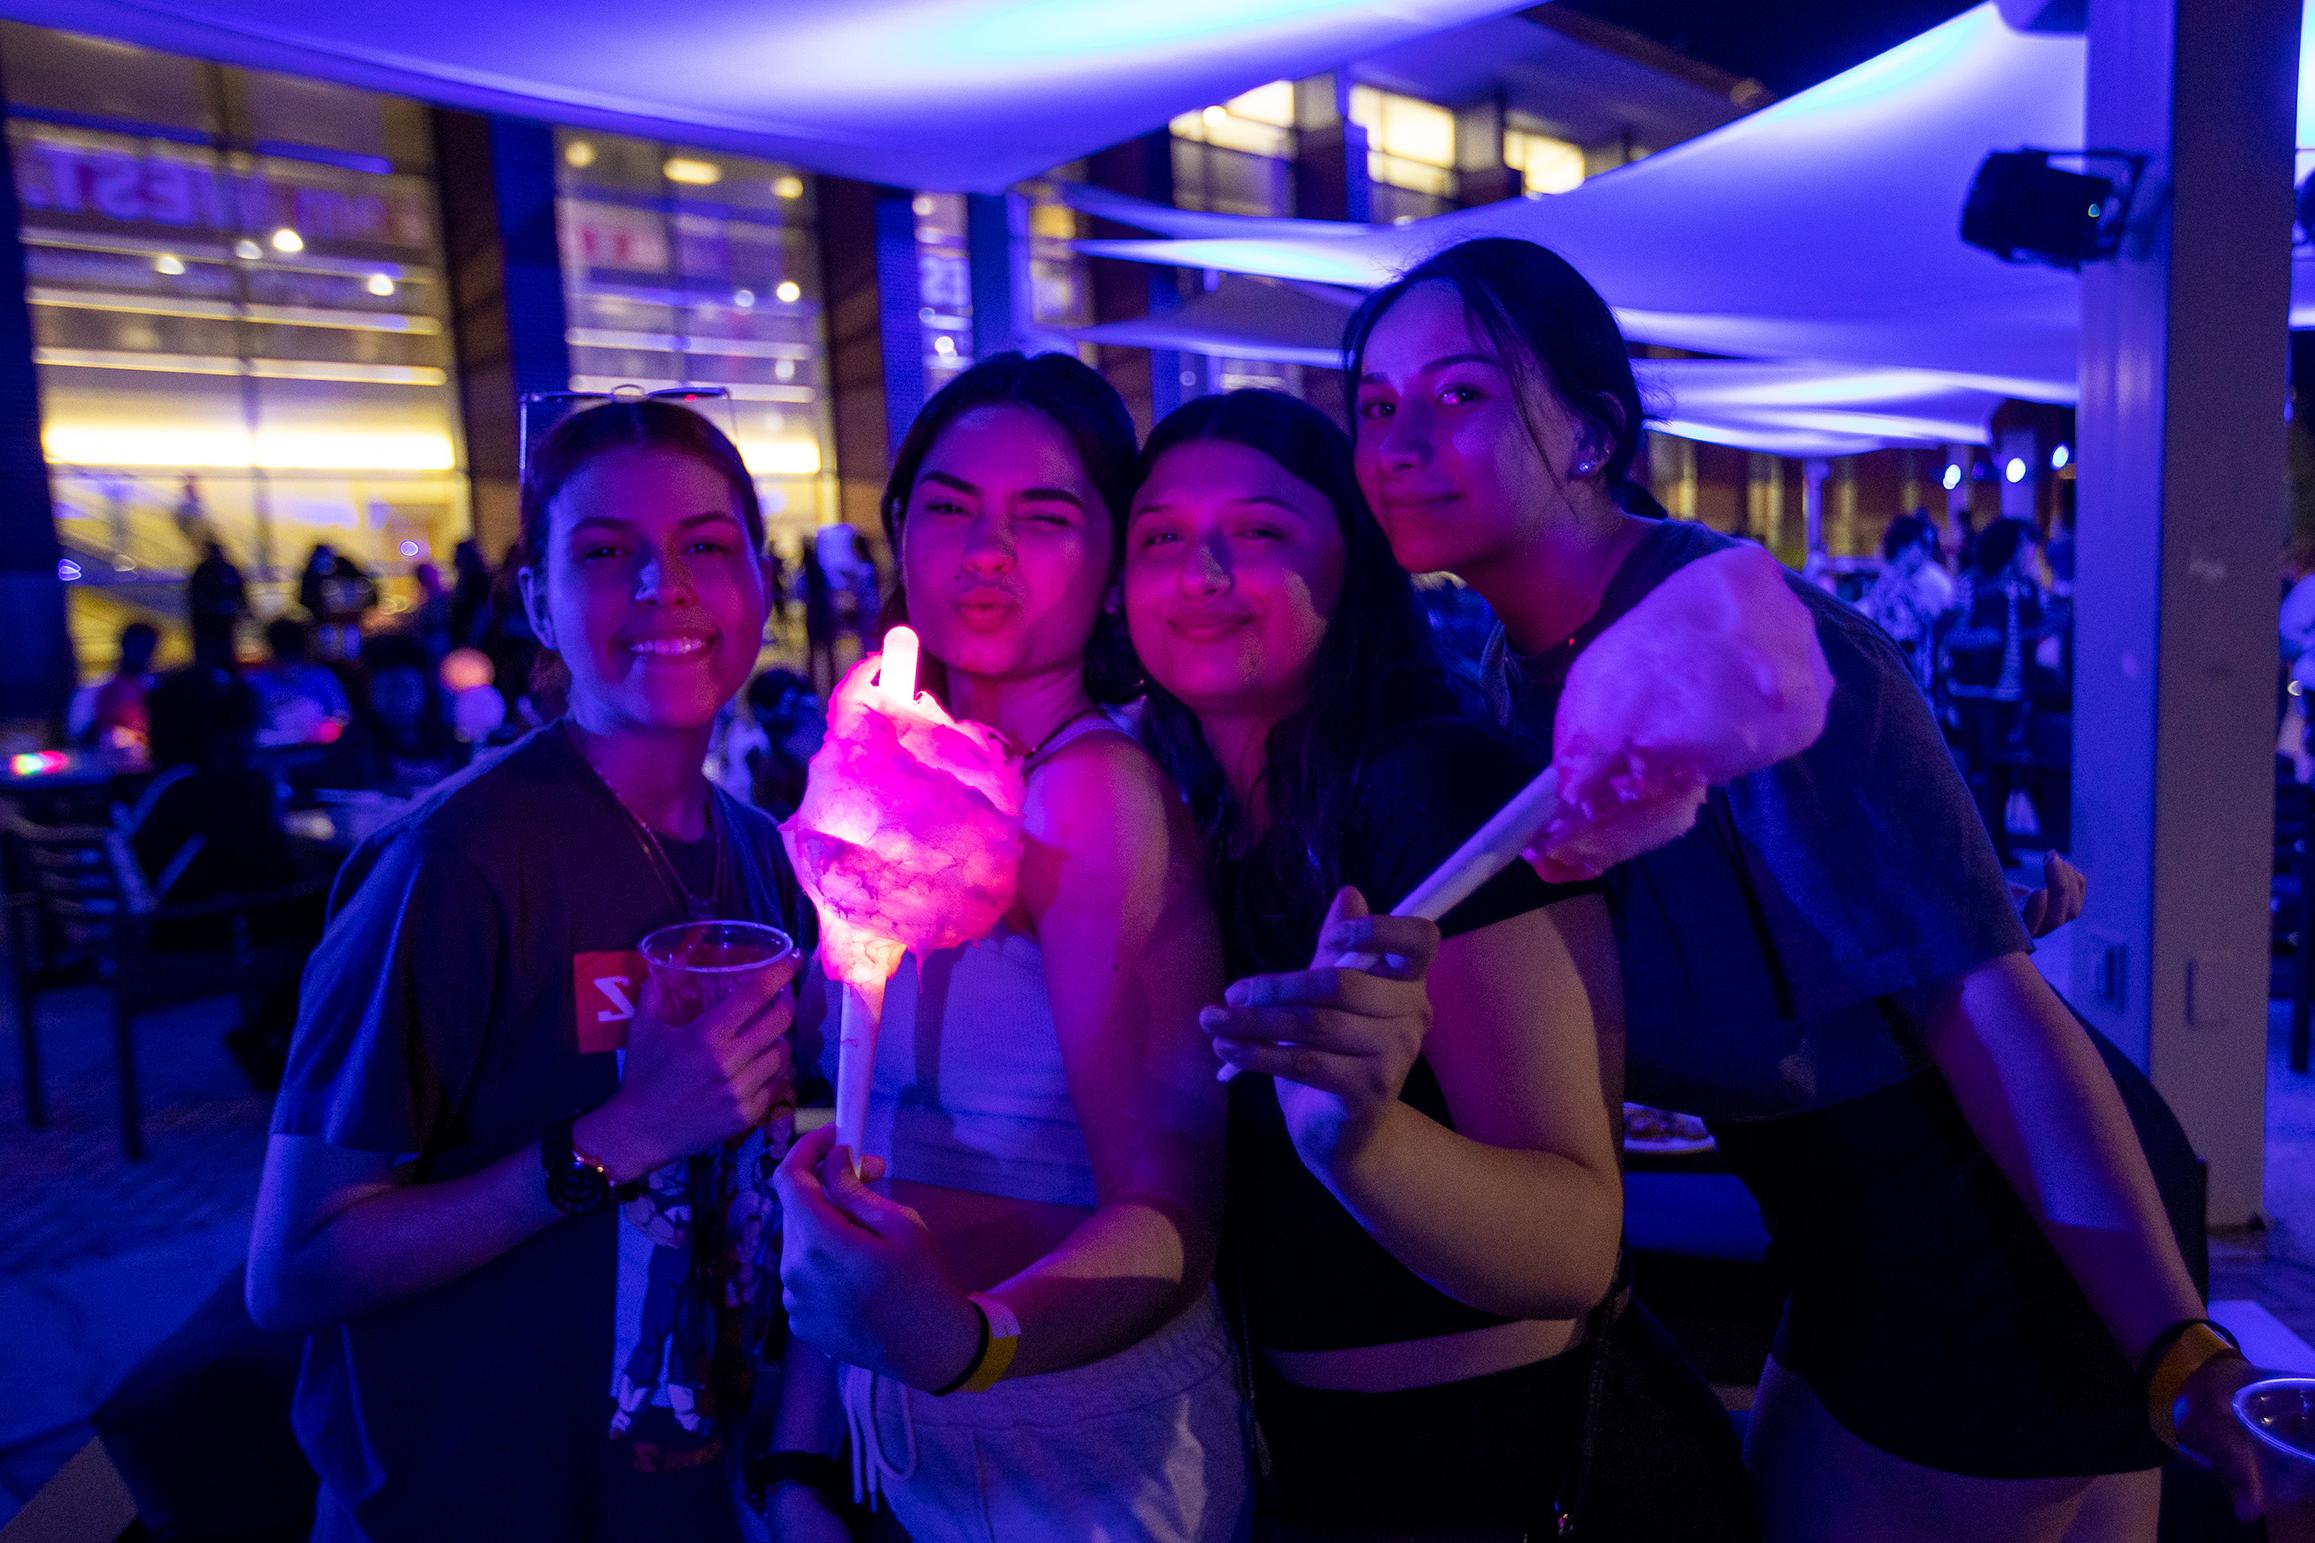 Students eating cotton candy at an event